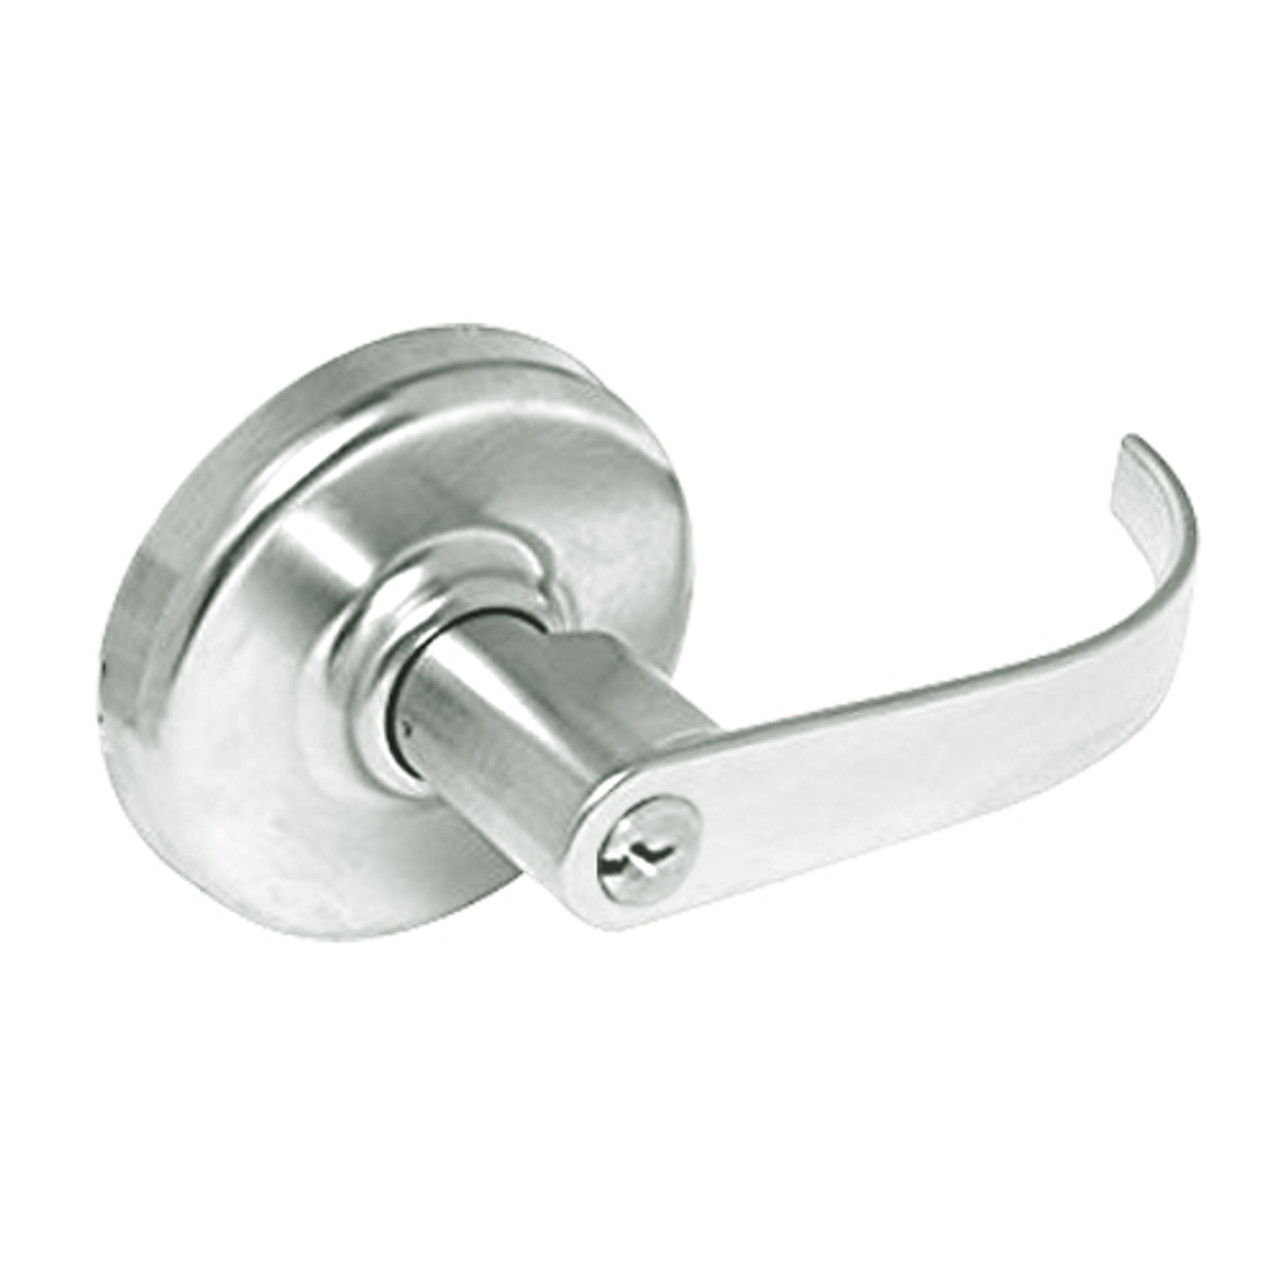 CL3161-PZD-618 Corbin CL3100 Series Vandal Resistant Entrance Cylindrical Locksets with Princeton Lever in Bright Nickel Plated Finish